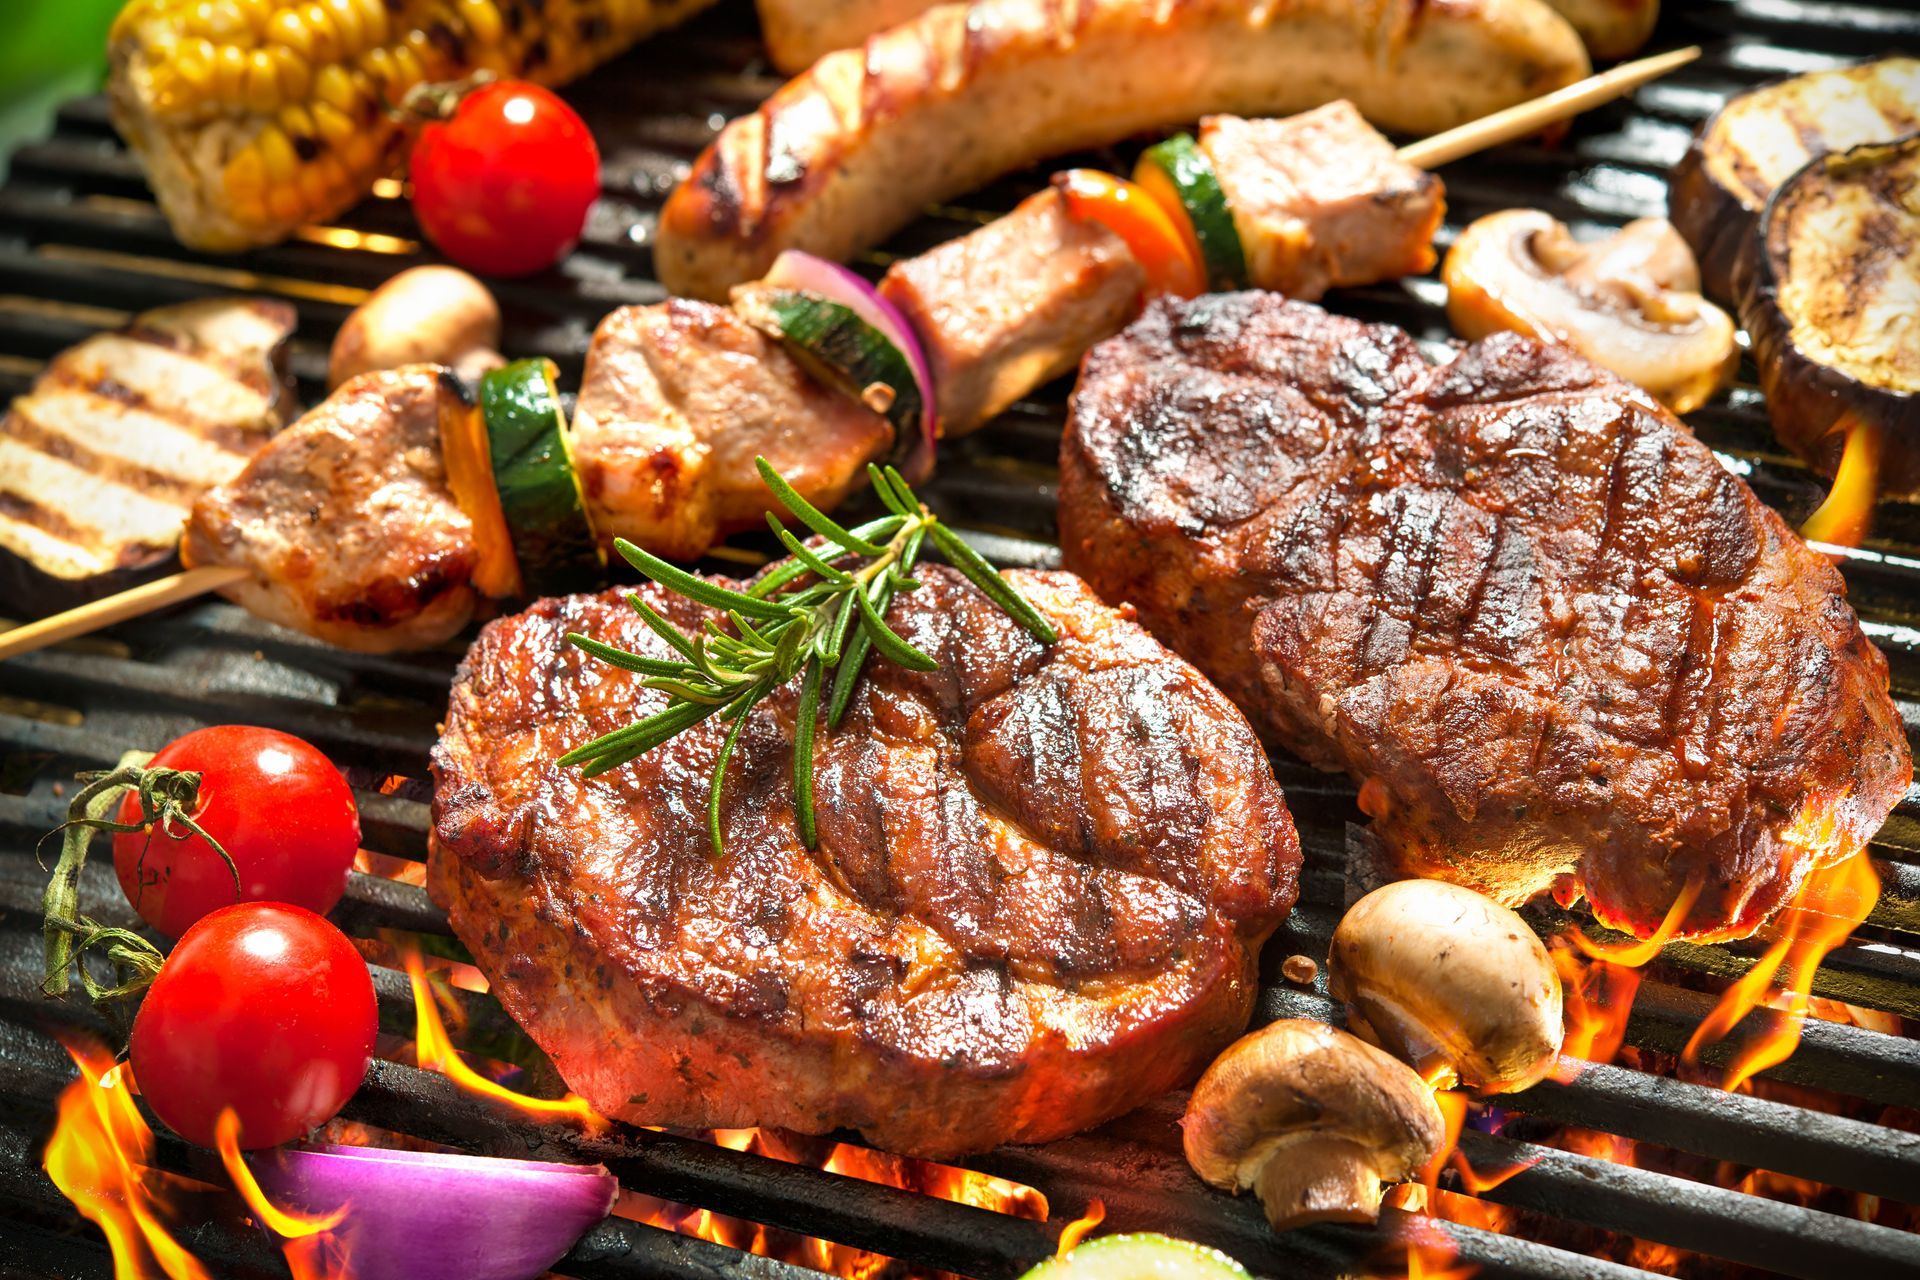 A variety of meats and vegetables are cooking on a grill.